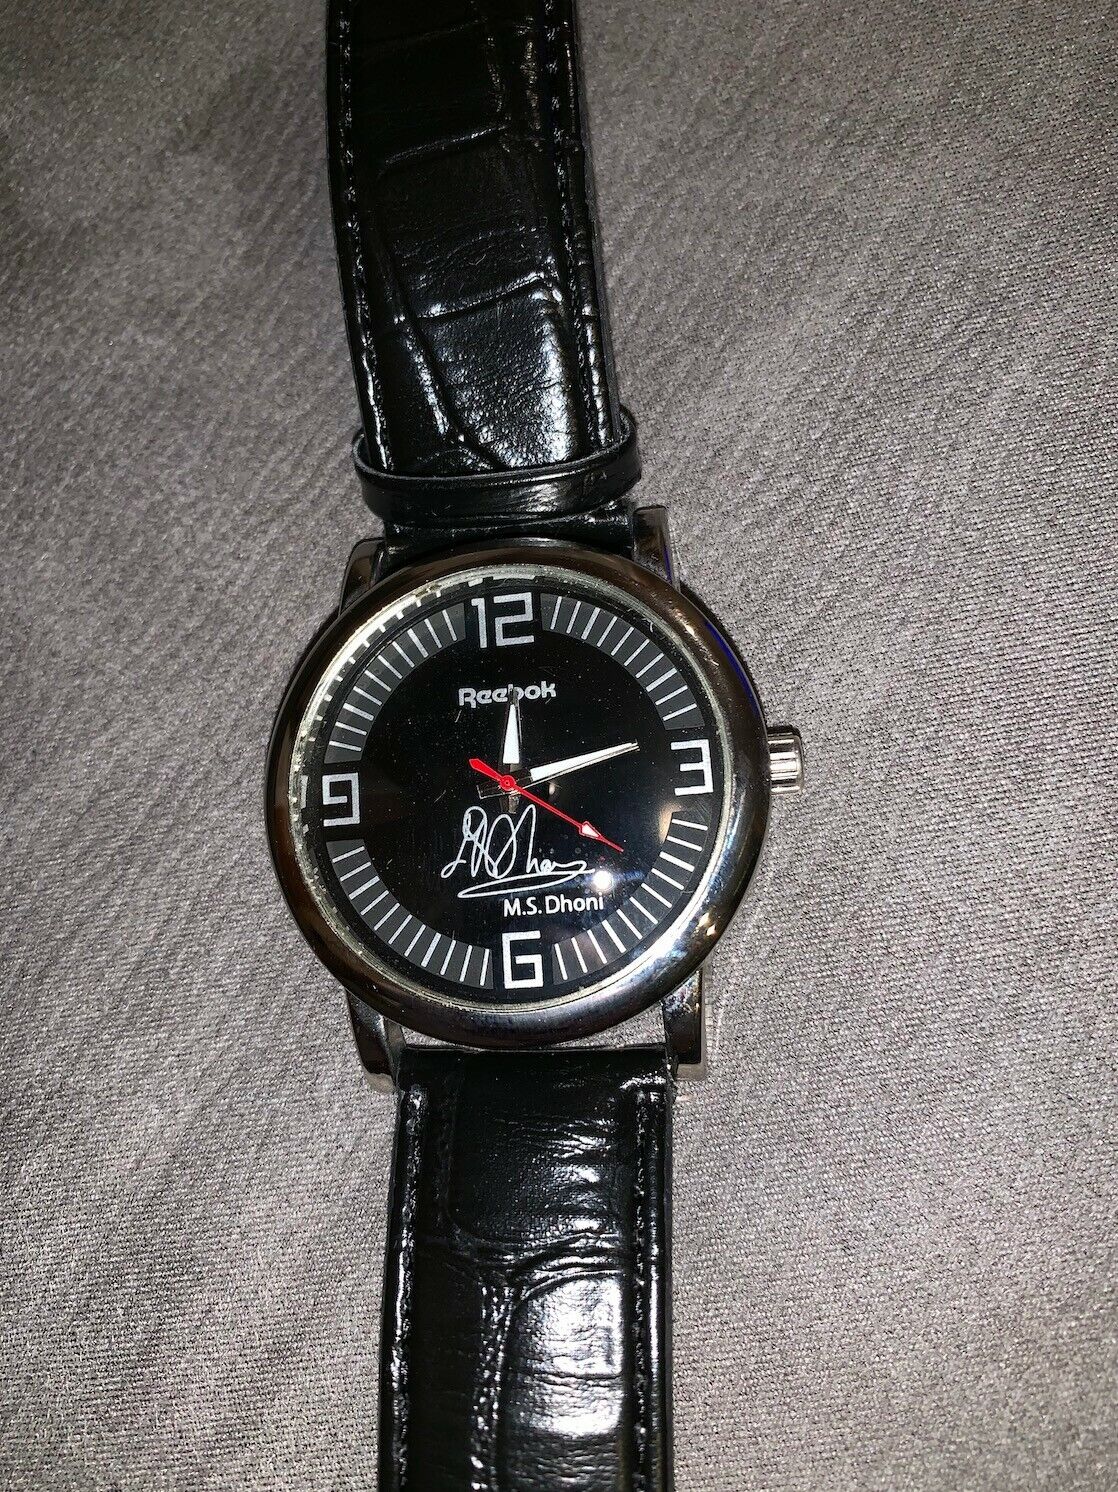 Reebok Leather Strap Men's Watch - sign of M.S. Dhoni (Indian Cricket Player)